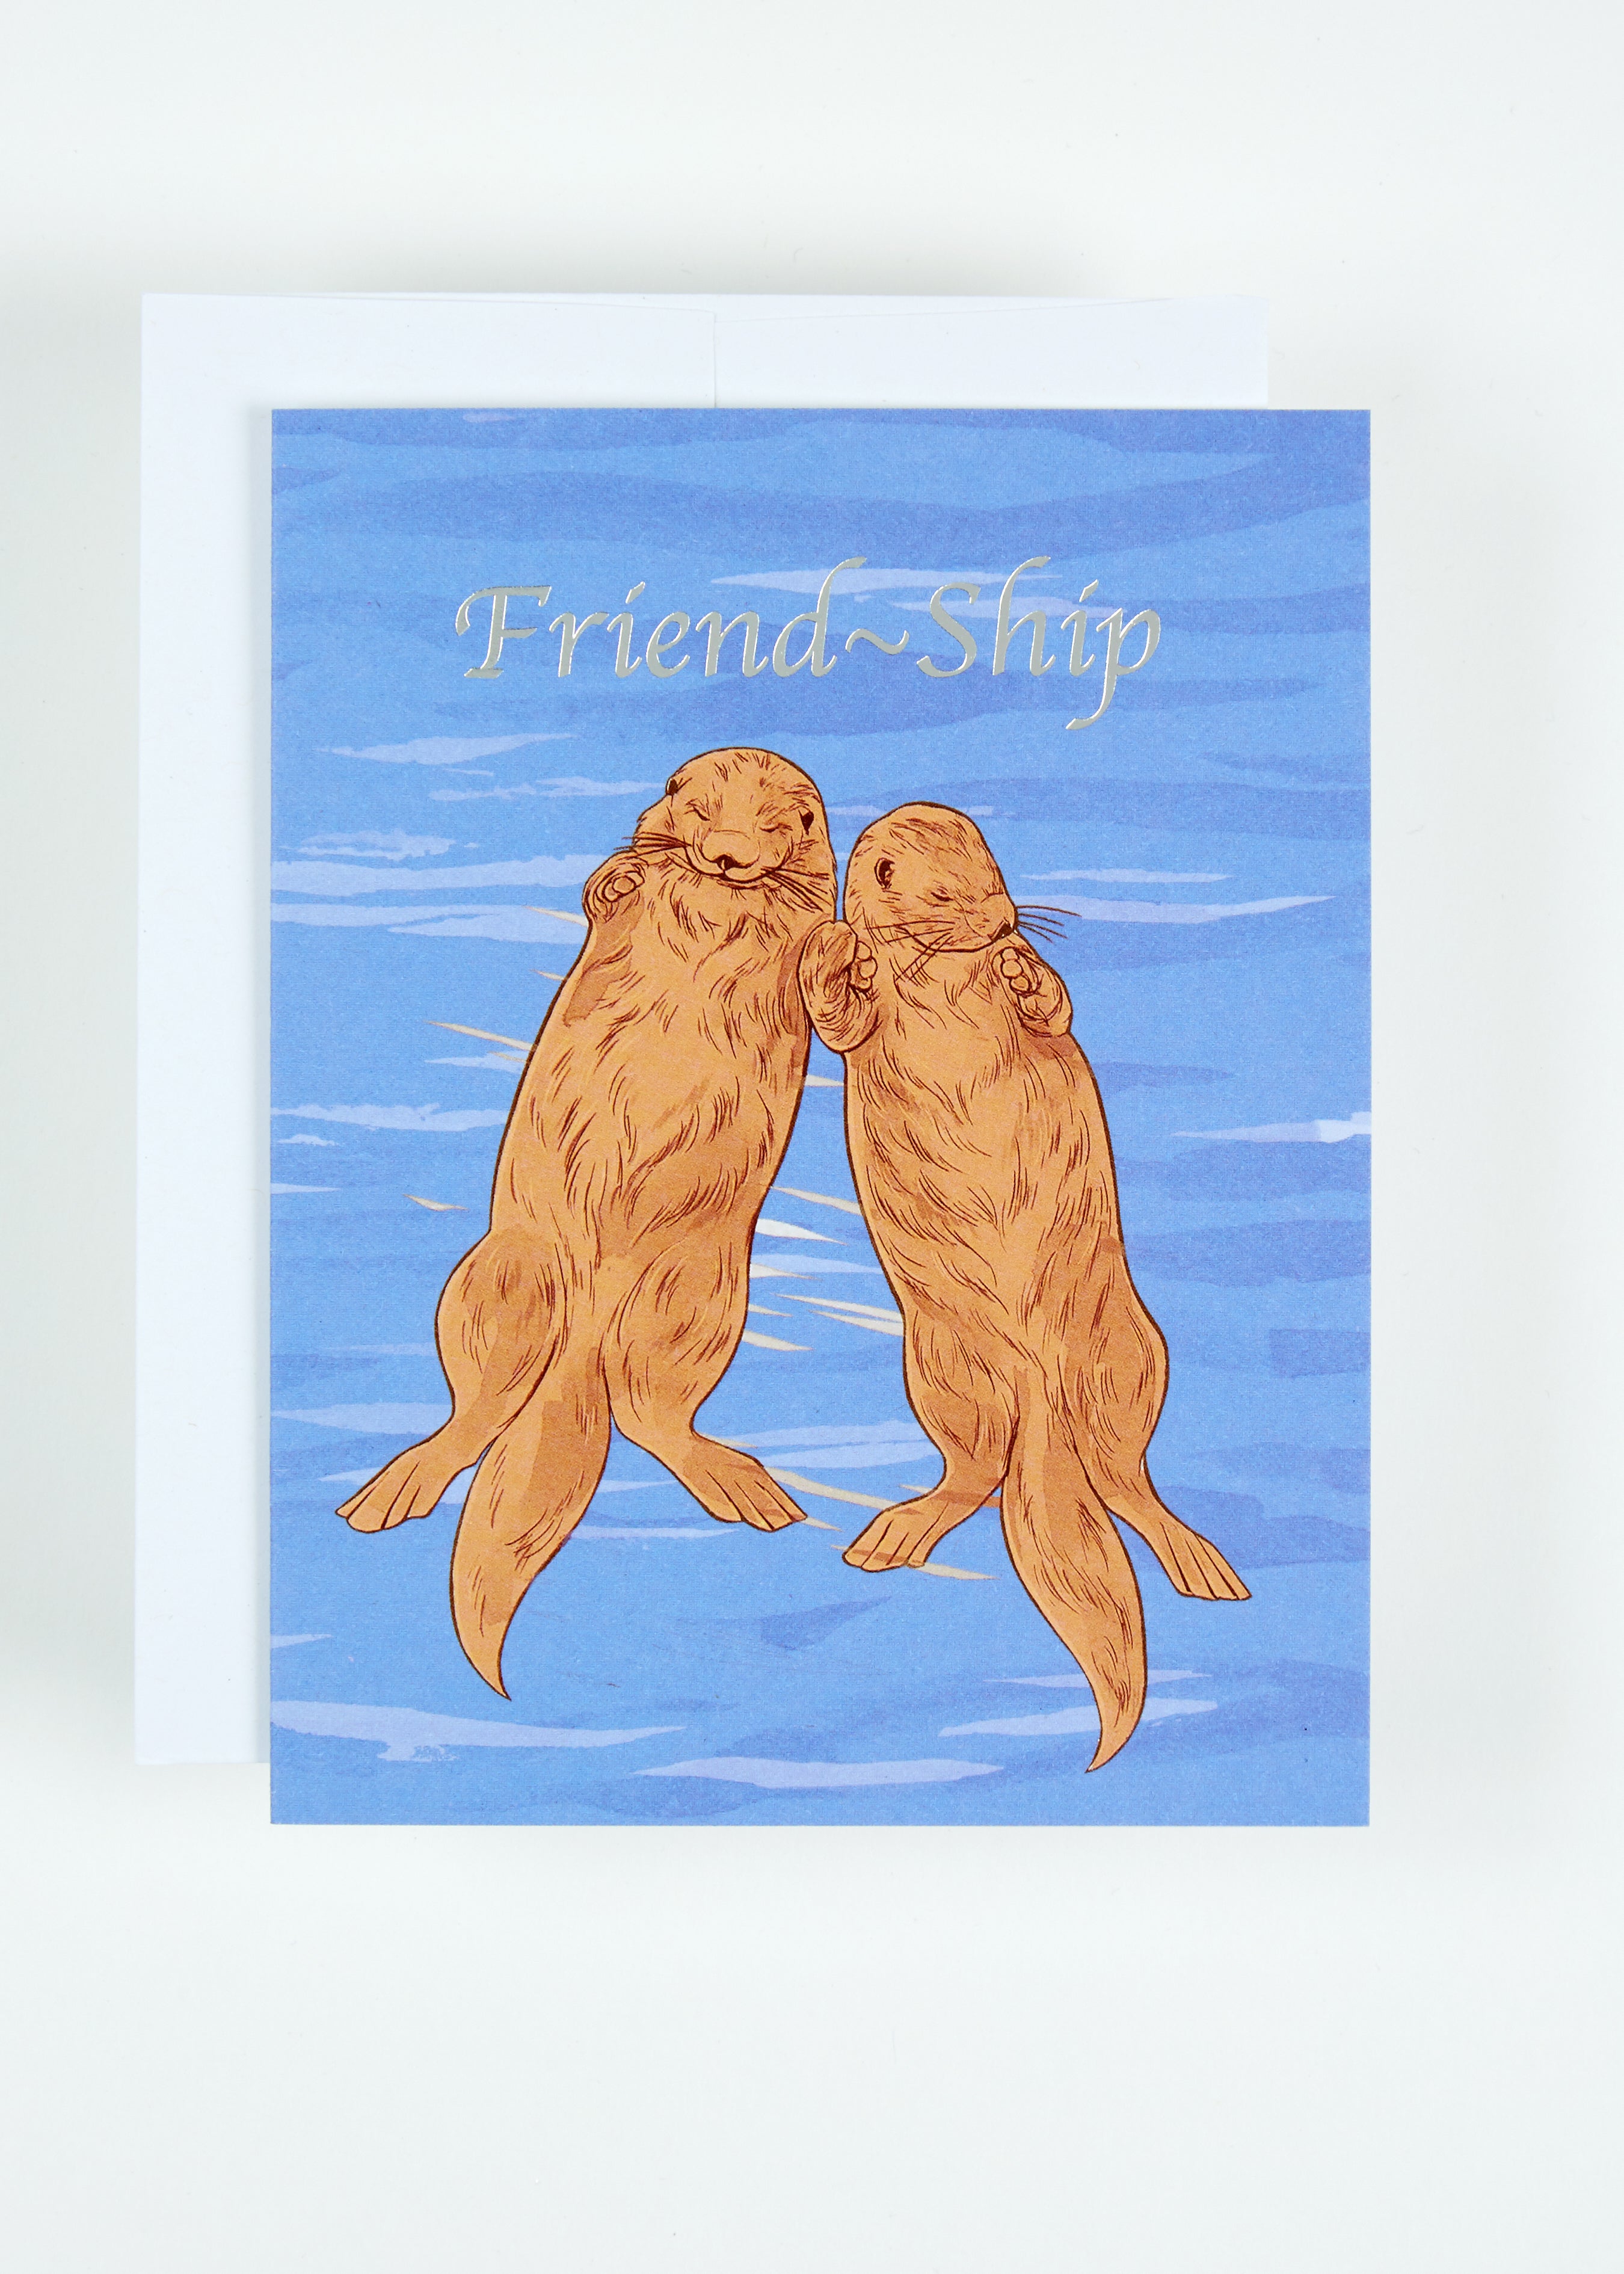 Greeting card printed with the text Friend-Ship and two otters holding hands